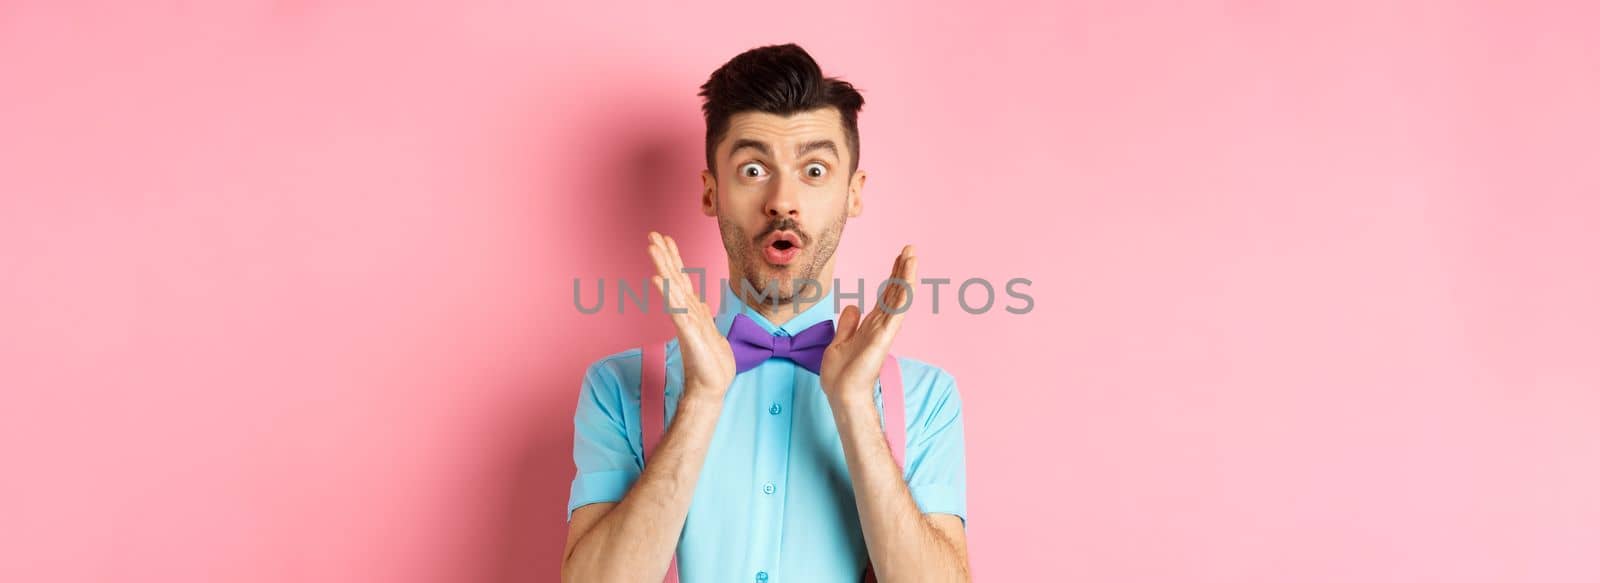 Portrait of funny guy say wow, staring amazed at camera, checking out awesome offer, standing in classy bow-tie on pink background.